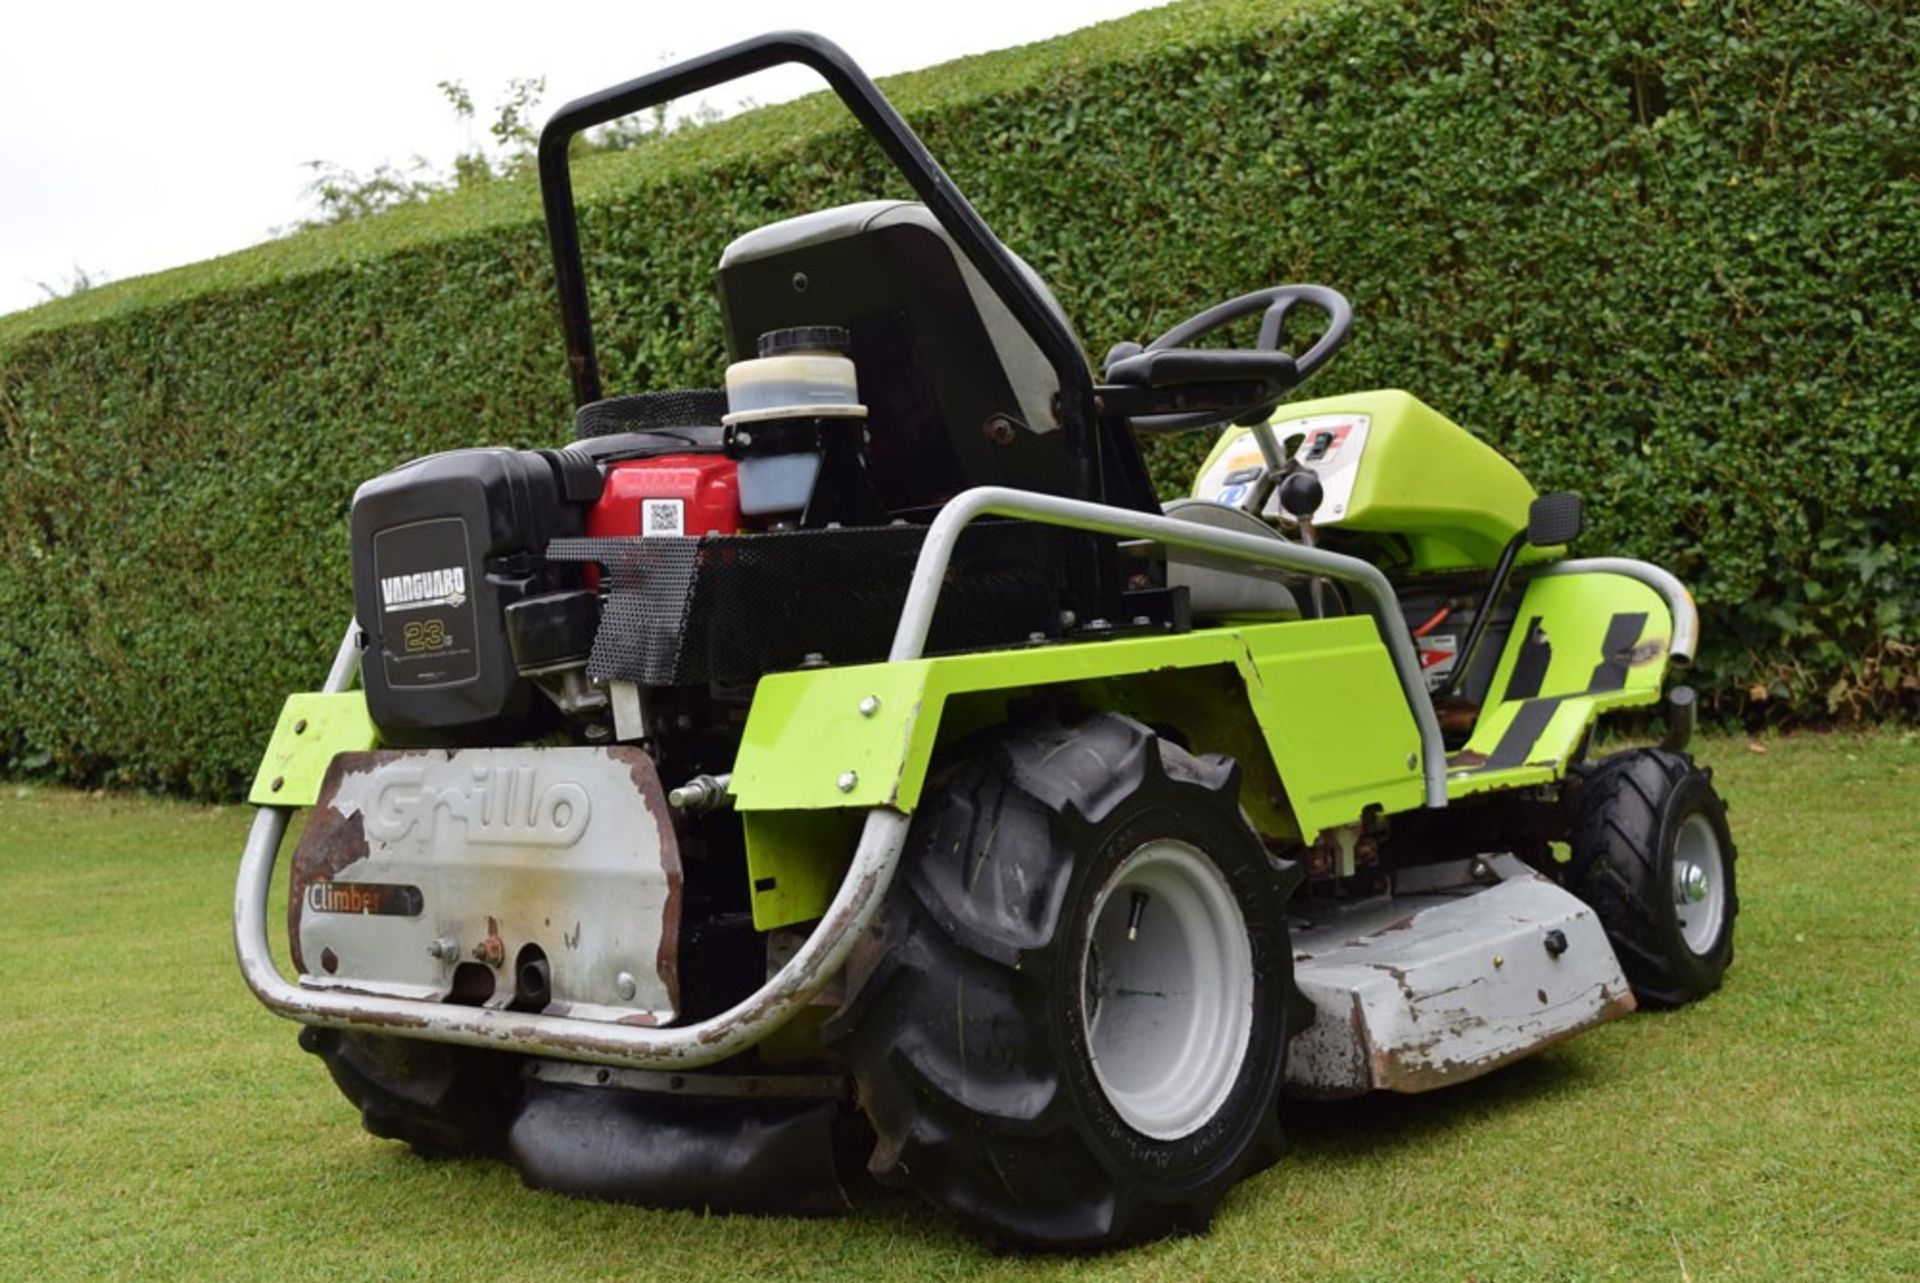 2011 Grillo Climber 9.21 Ride On Rotary Mower - Image 9 of 10